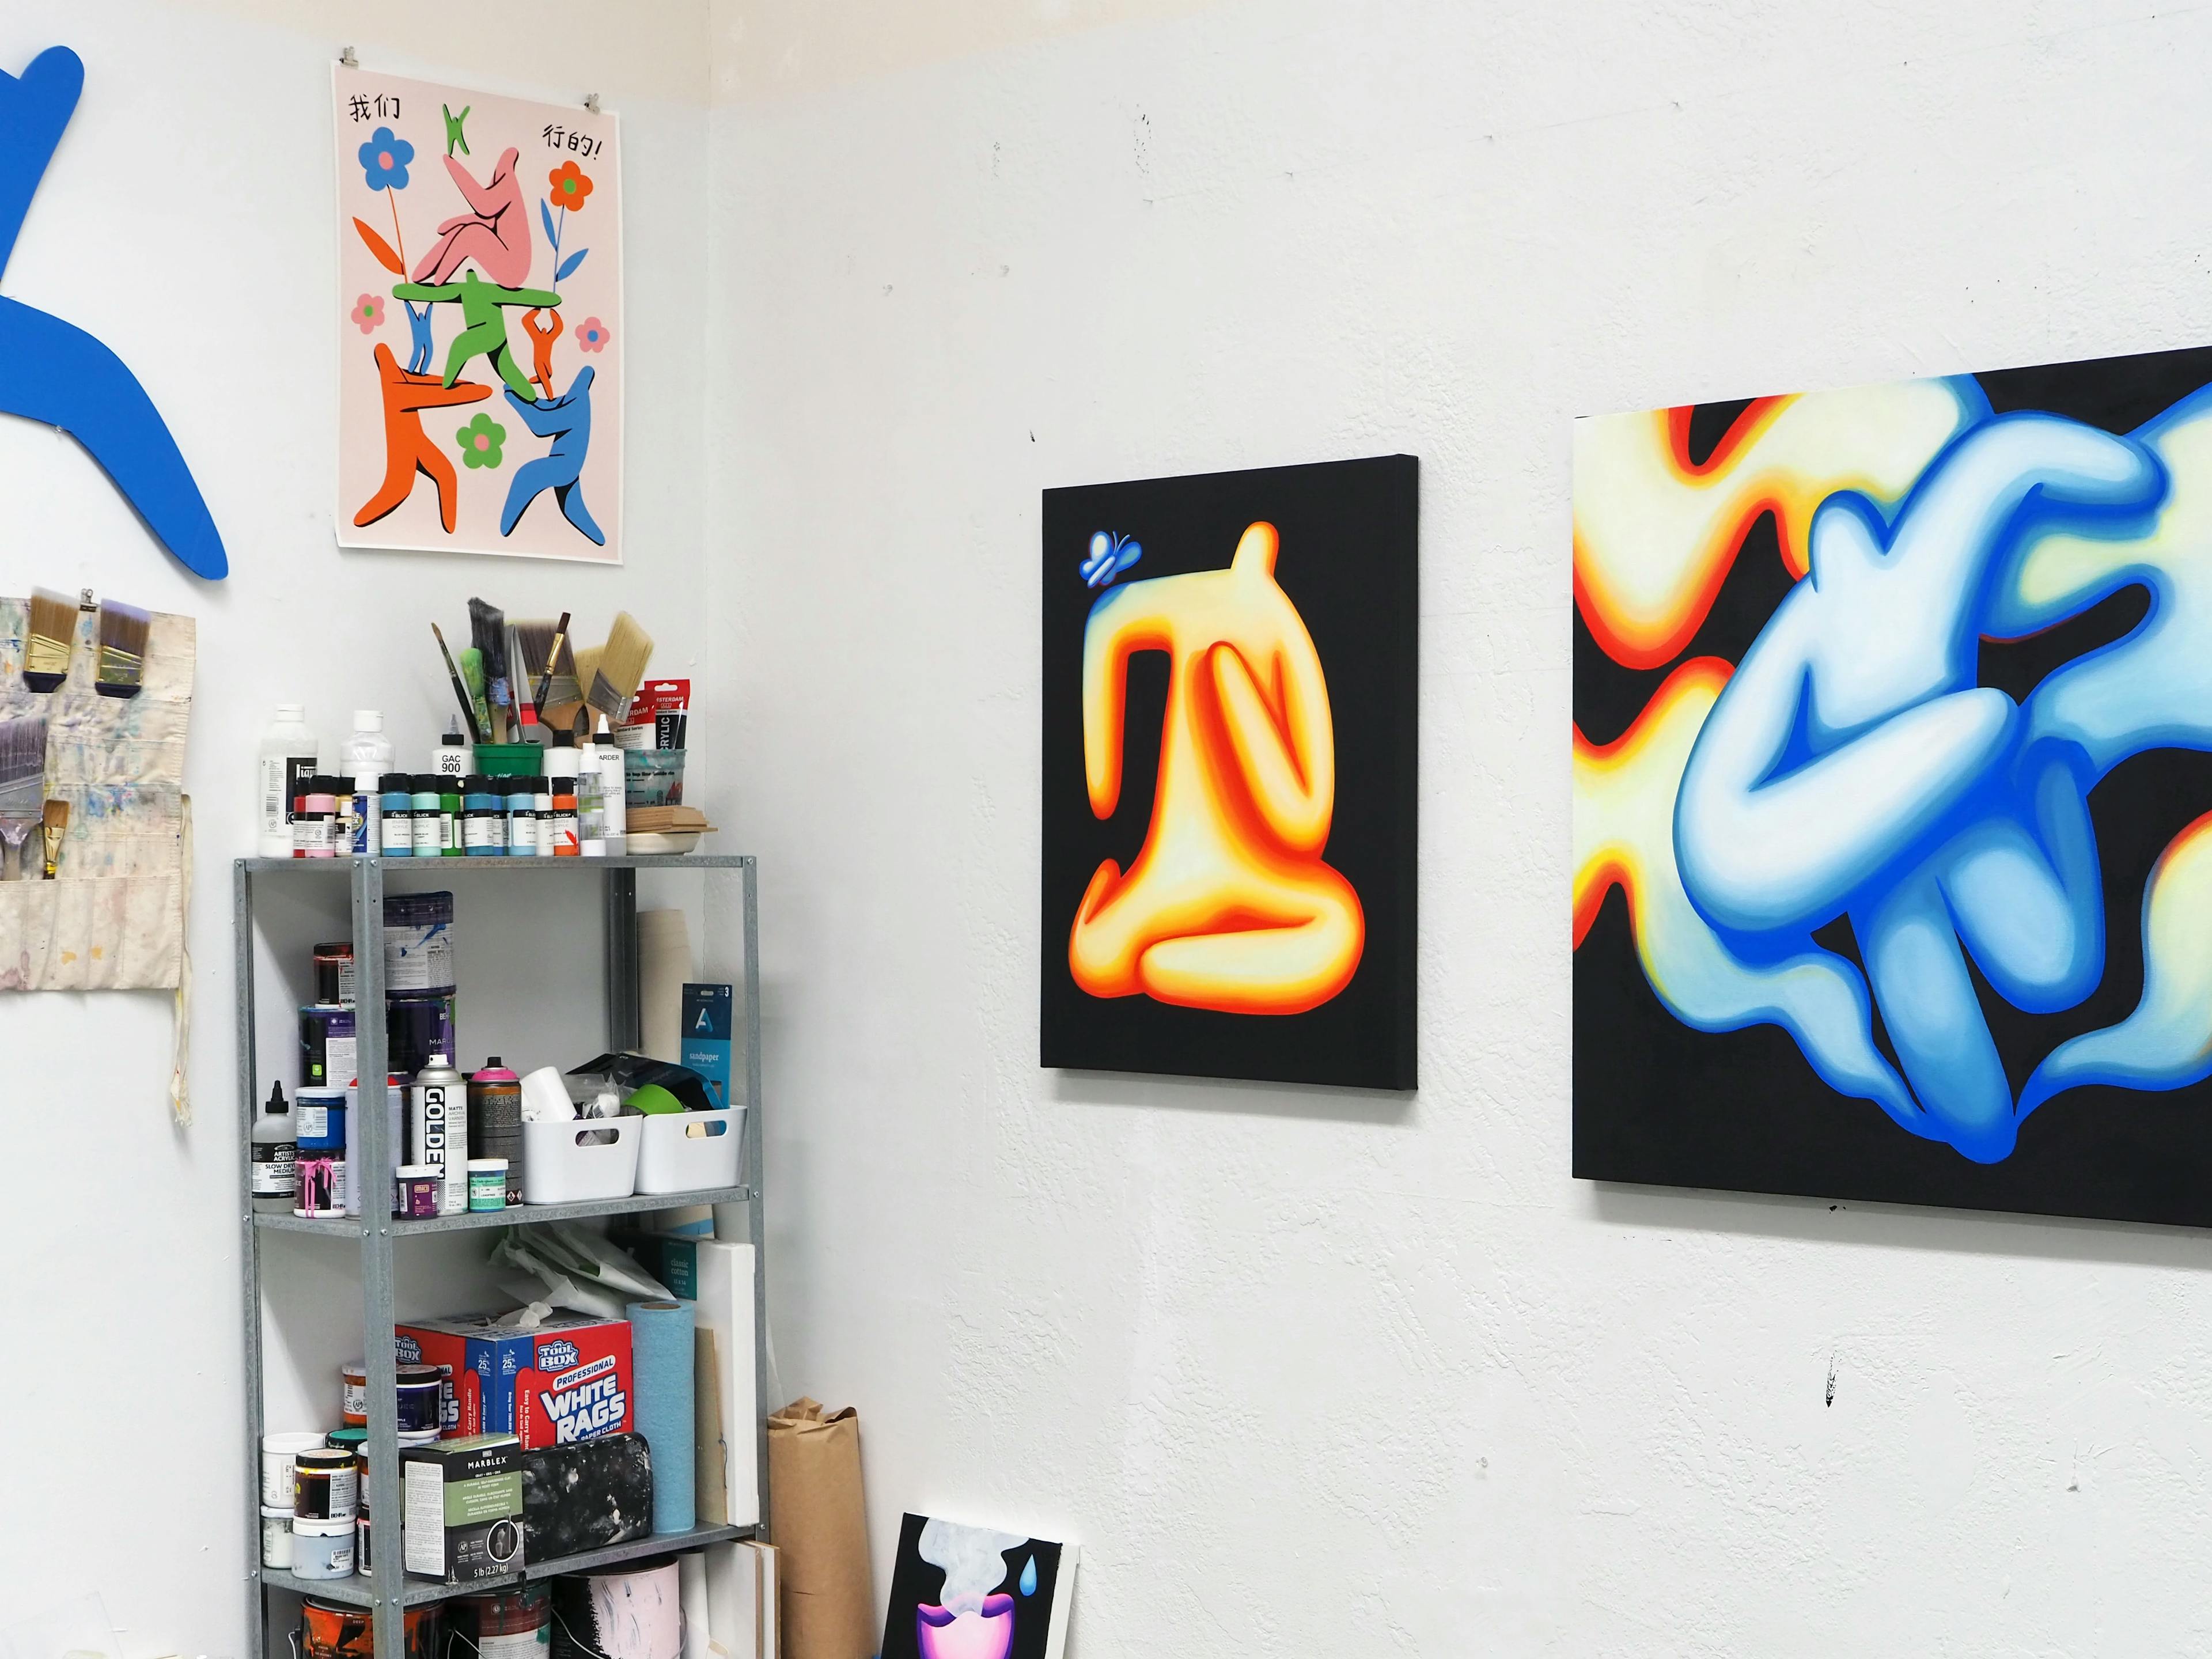 A corner view of Jocelyn Tsaih's studio. There is a standing shelf filled with supplies in the corner, and on the walls are three paintings of abstracted figures. 